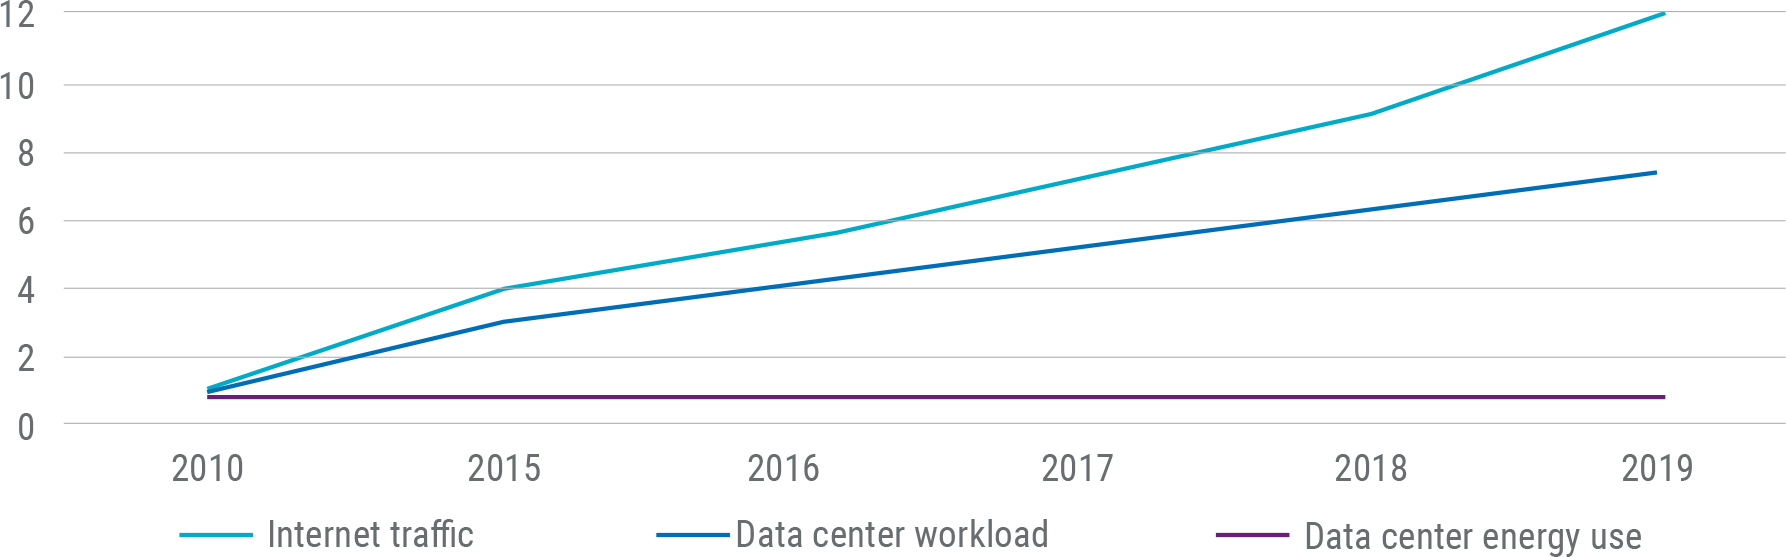 Global Trends in Internet Traffic, Data Center Workloads, and Data Center Energy Use, 2010-2019